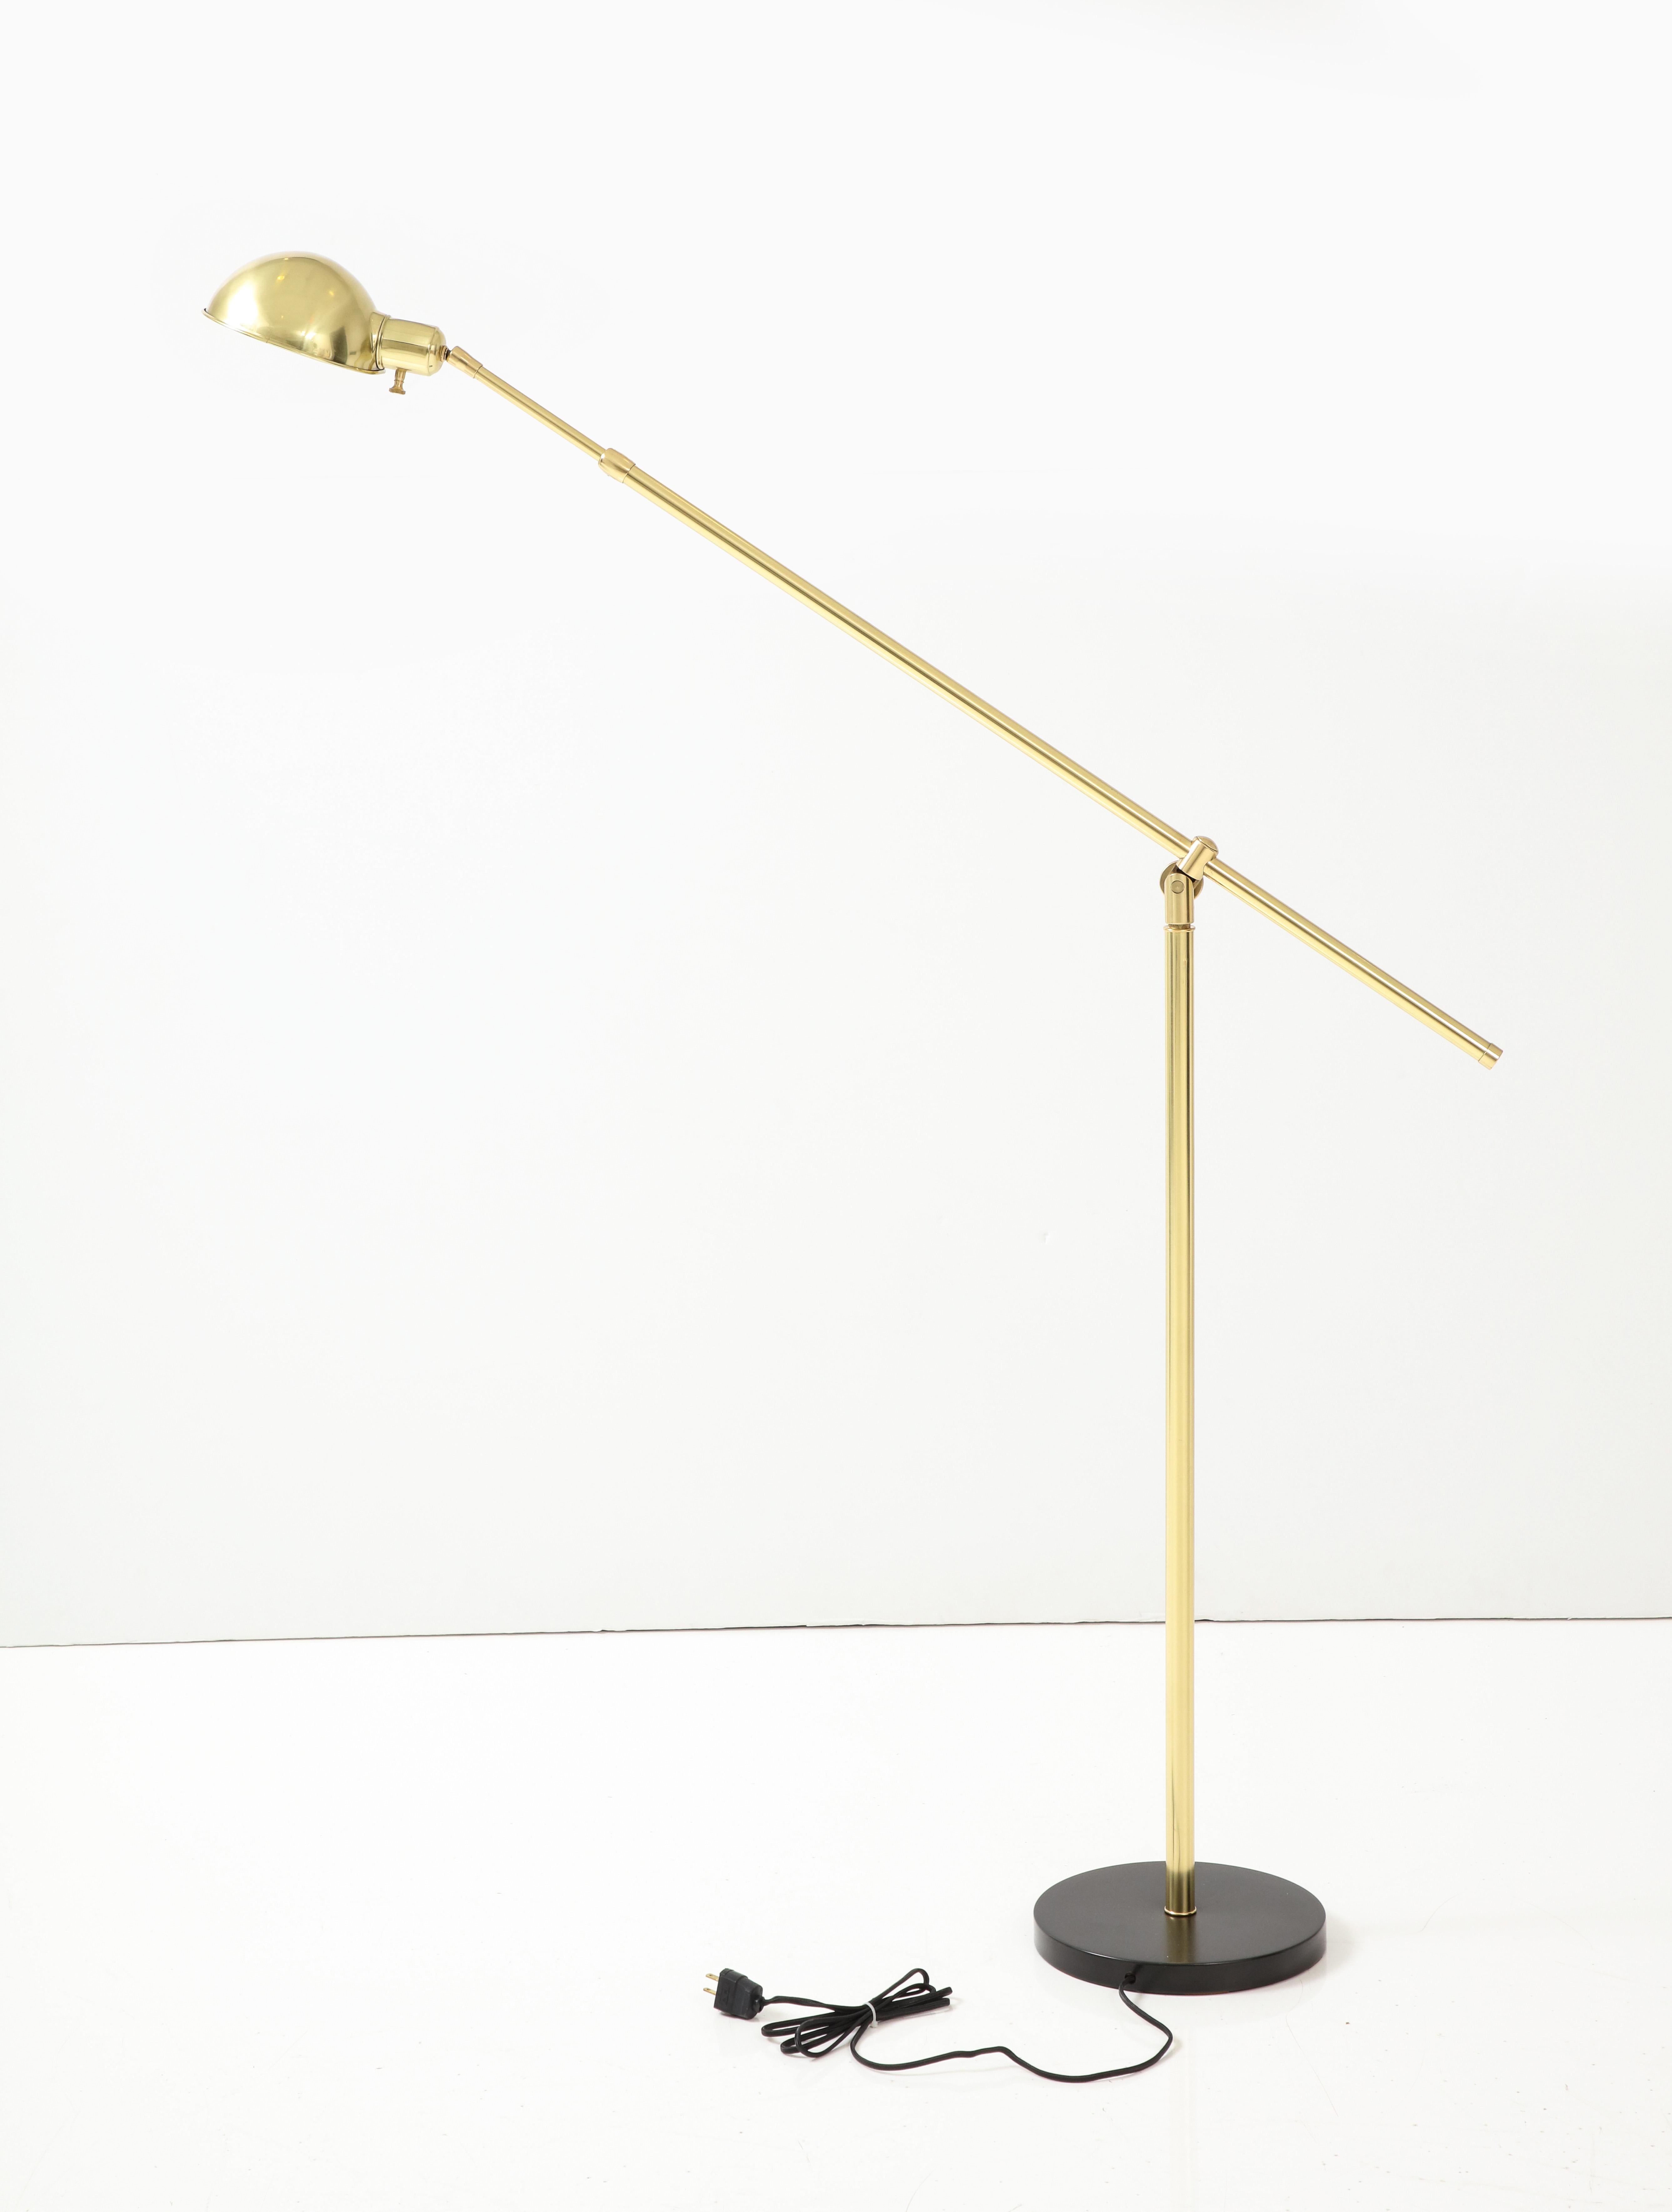 Architectural adjustable brass floor lamp on a darkened bronze base featuring a swiveling brass hood. Rewired by an UL listed electrician.